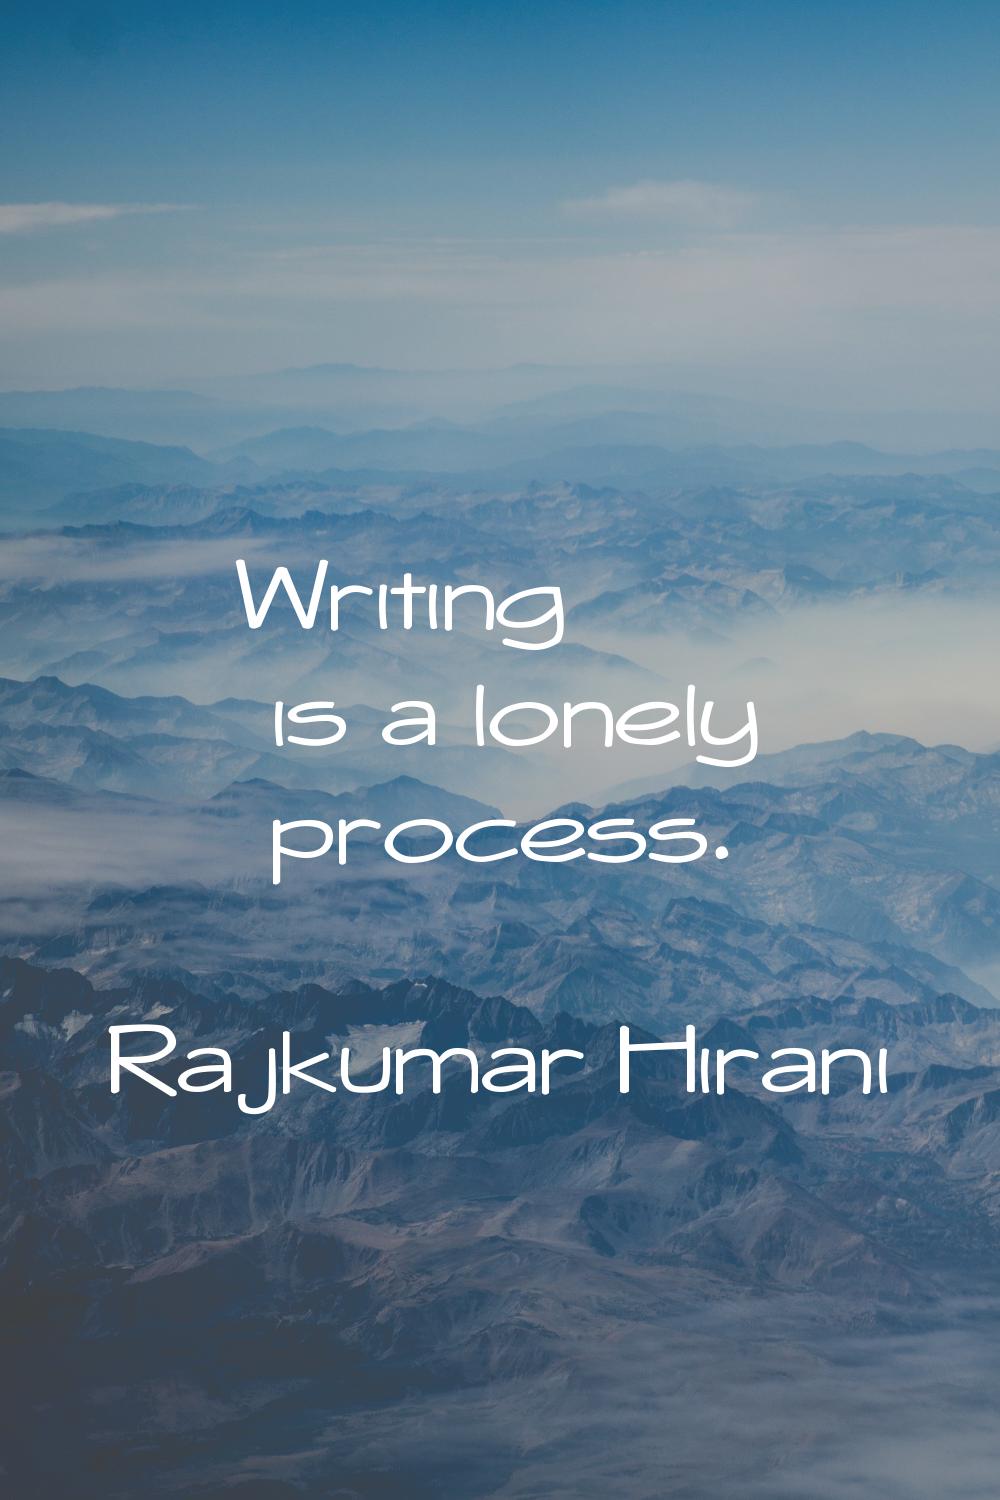 Writing is a lonely process.